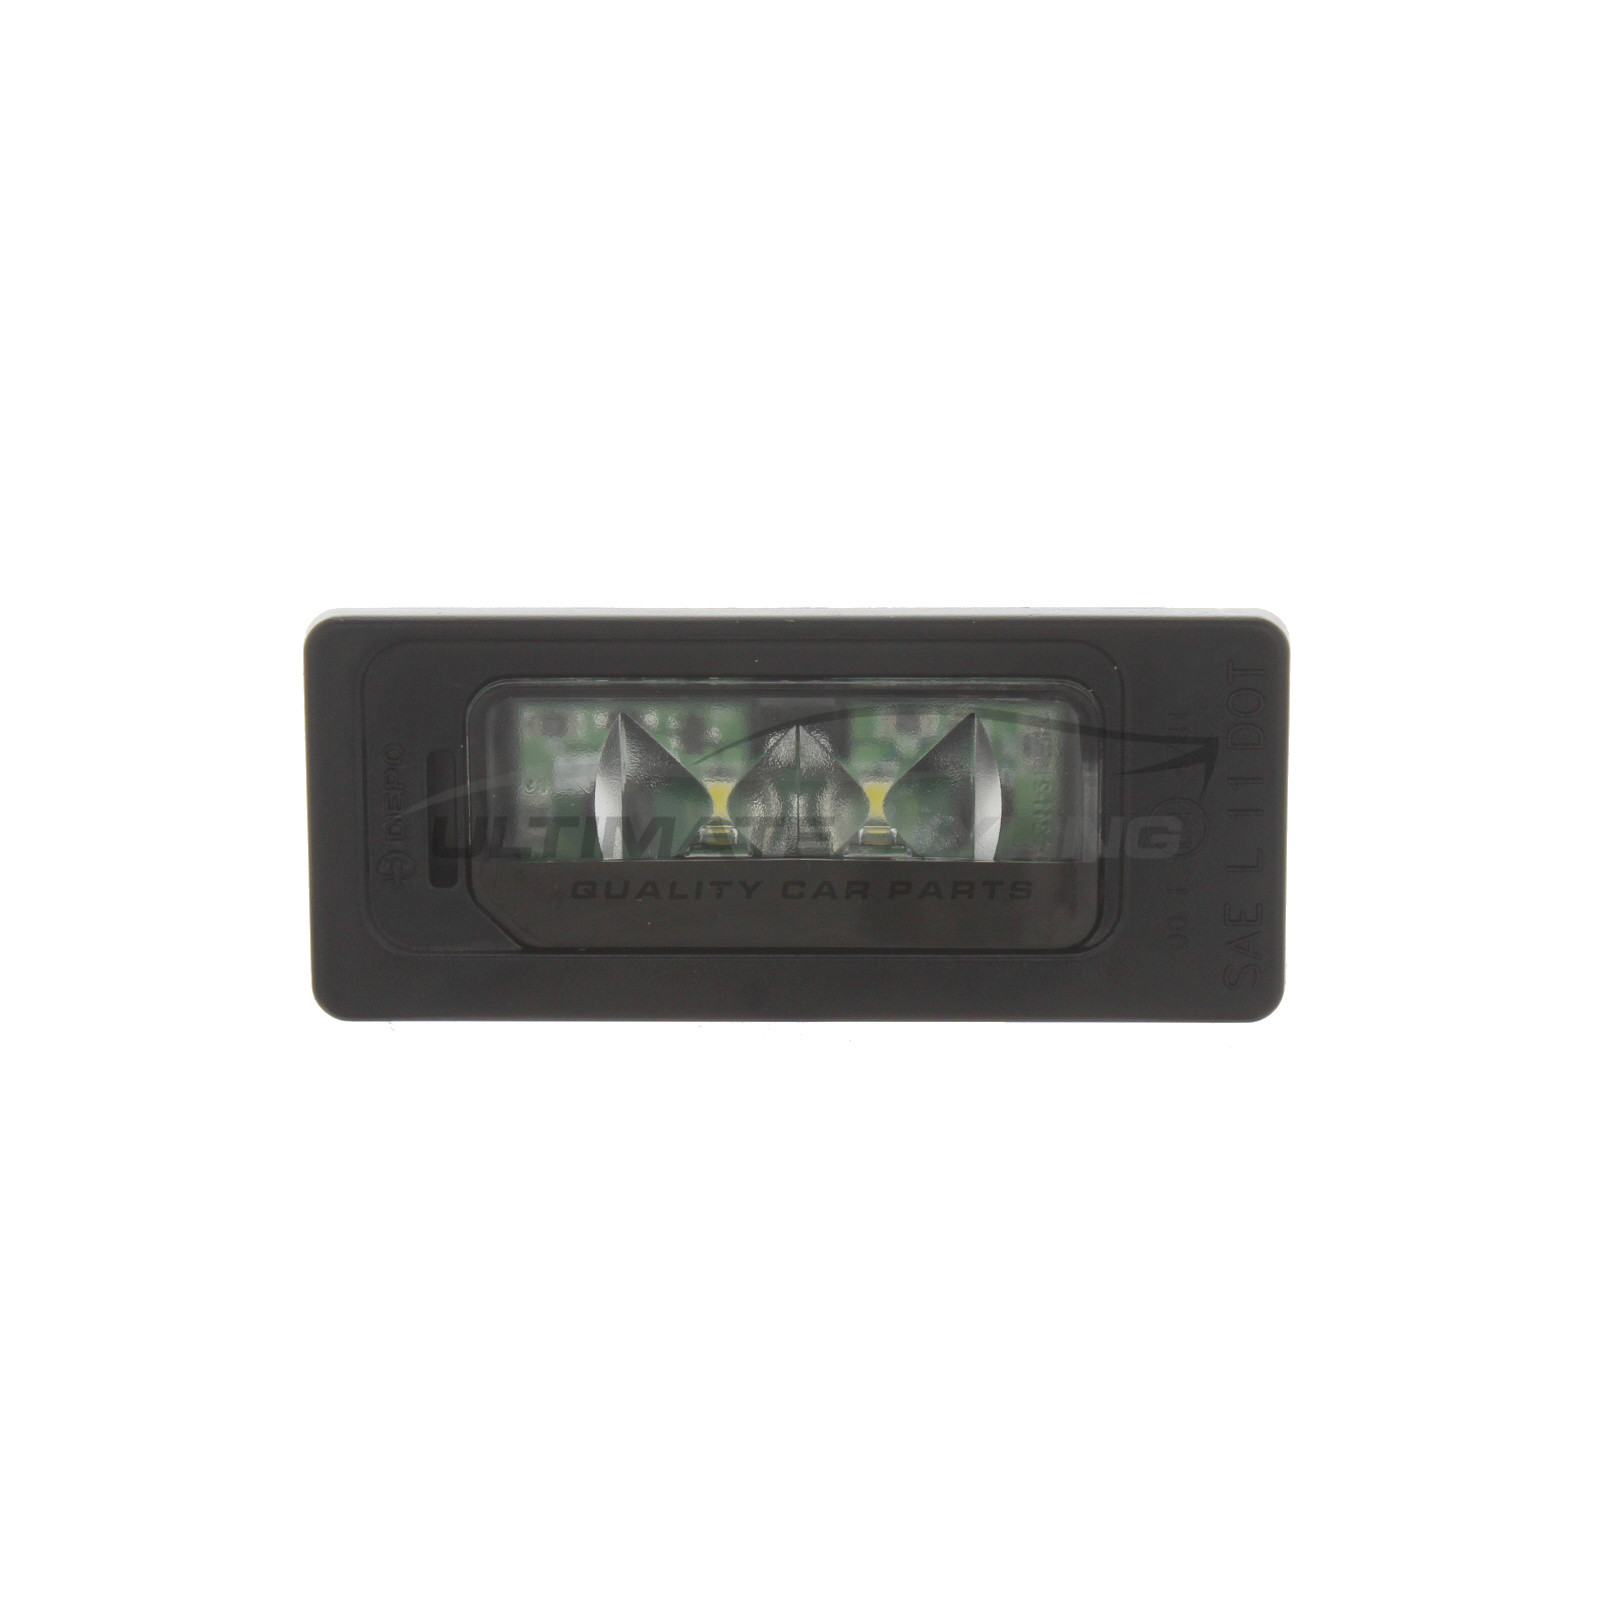 Rear Number Plate Light for VW Caddy